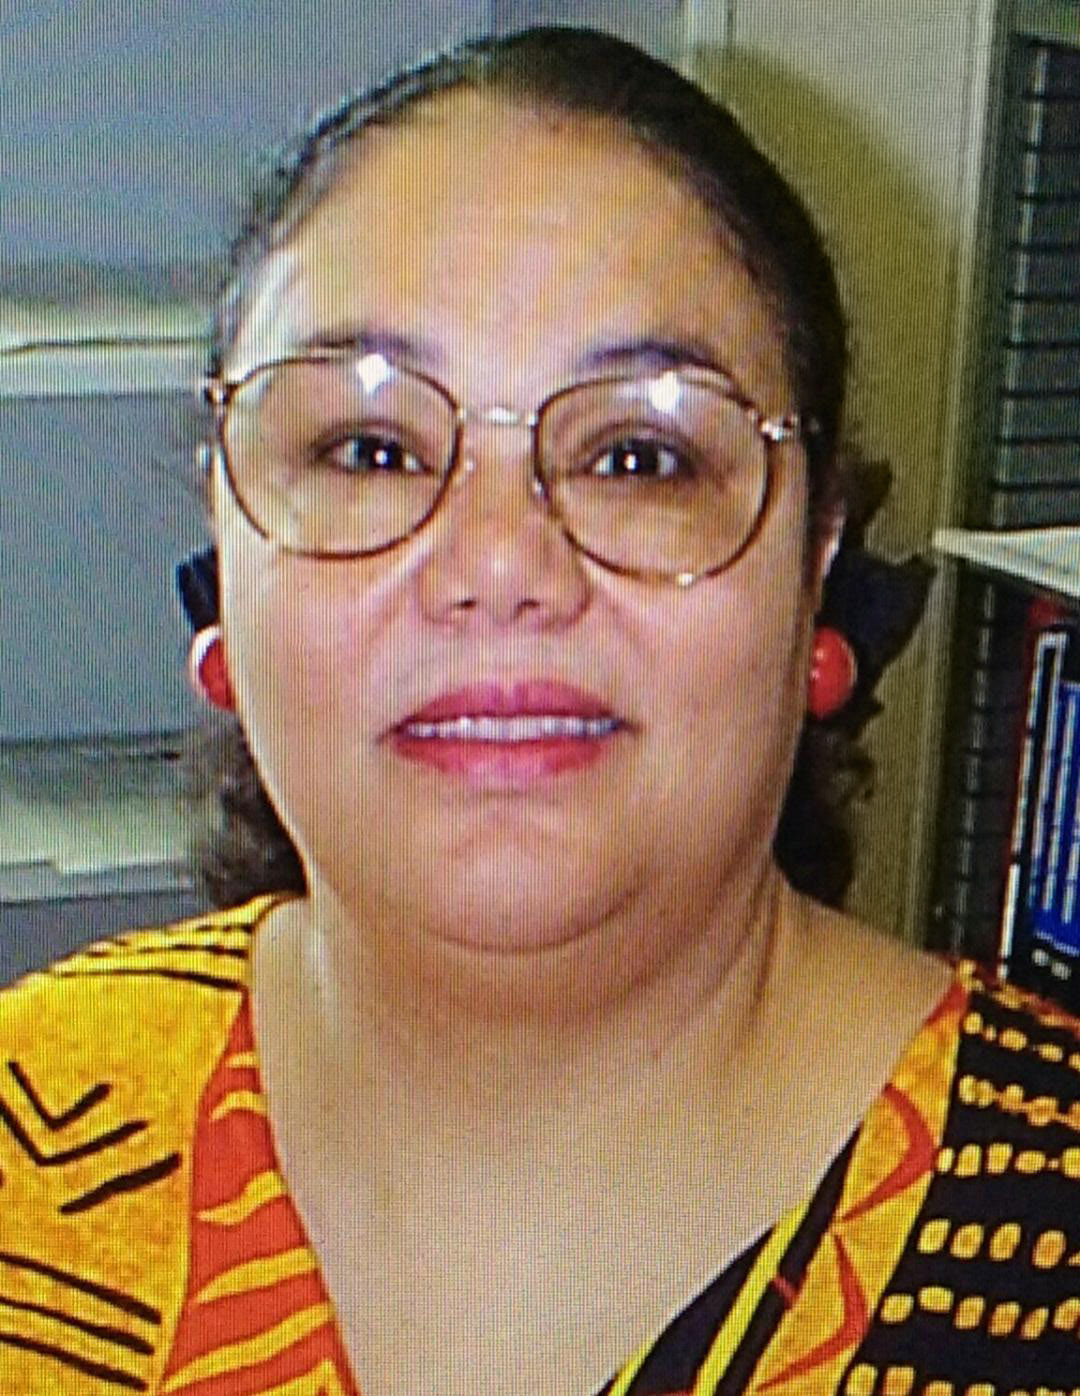 Professor Flore Zéphir was a Haitian linguist, anthropologist and professor of French at the University of Missouri-Columbia.